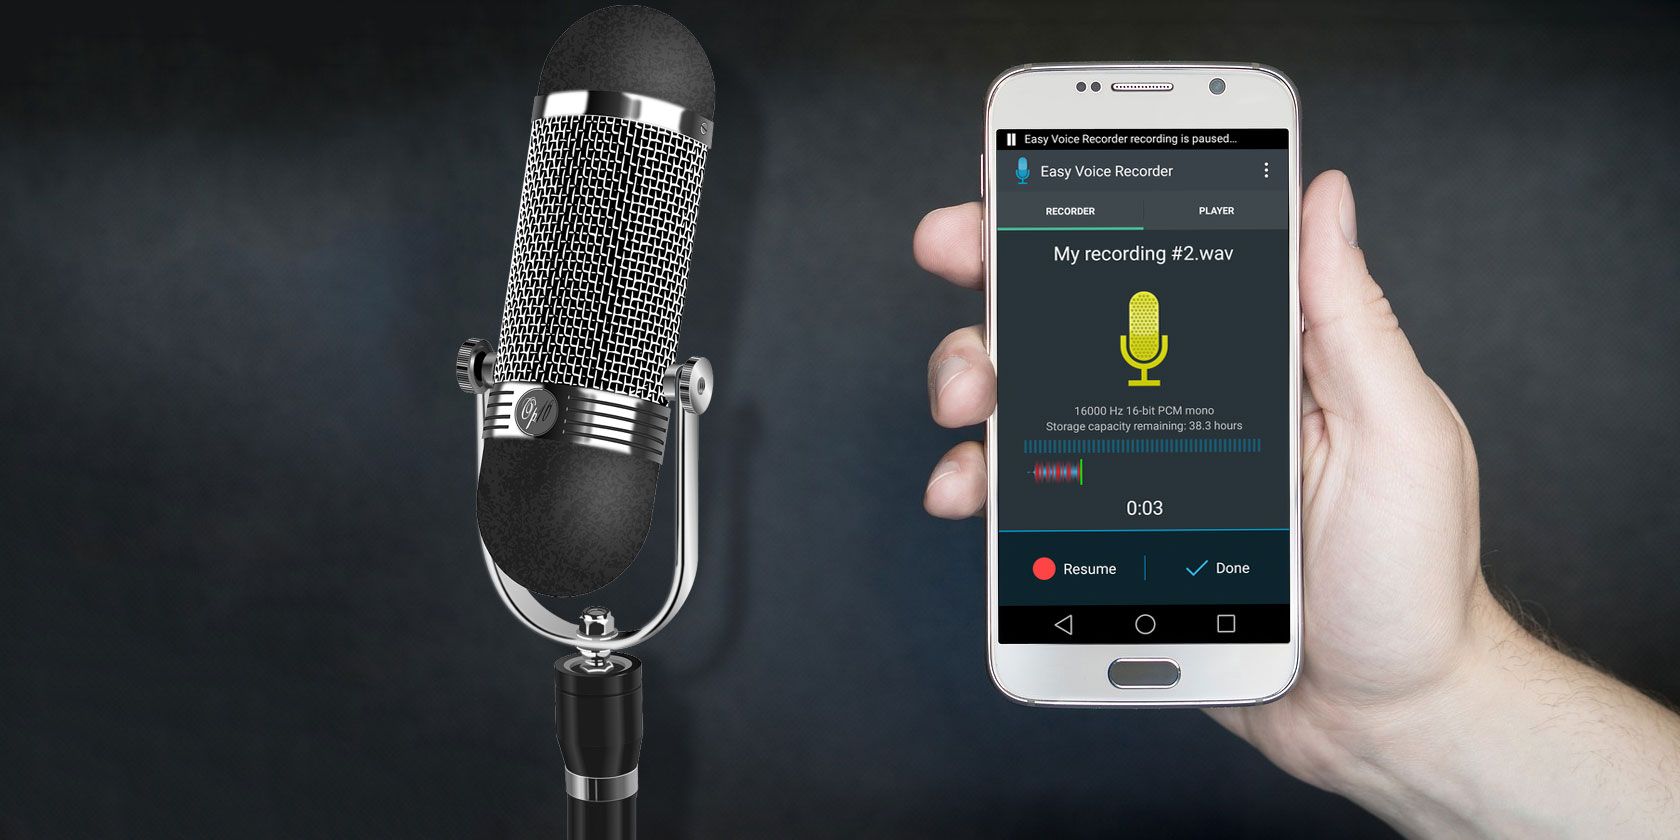 beu woordenboek Pardon How to Record Audio With a USB Microphone on Android